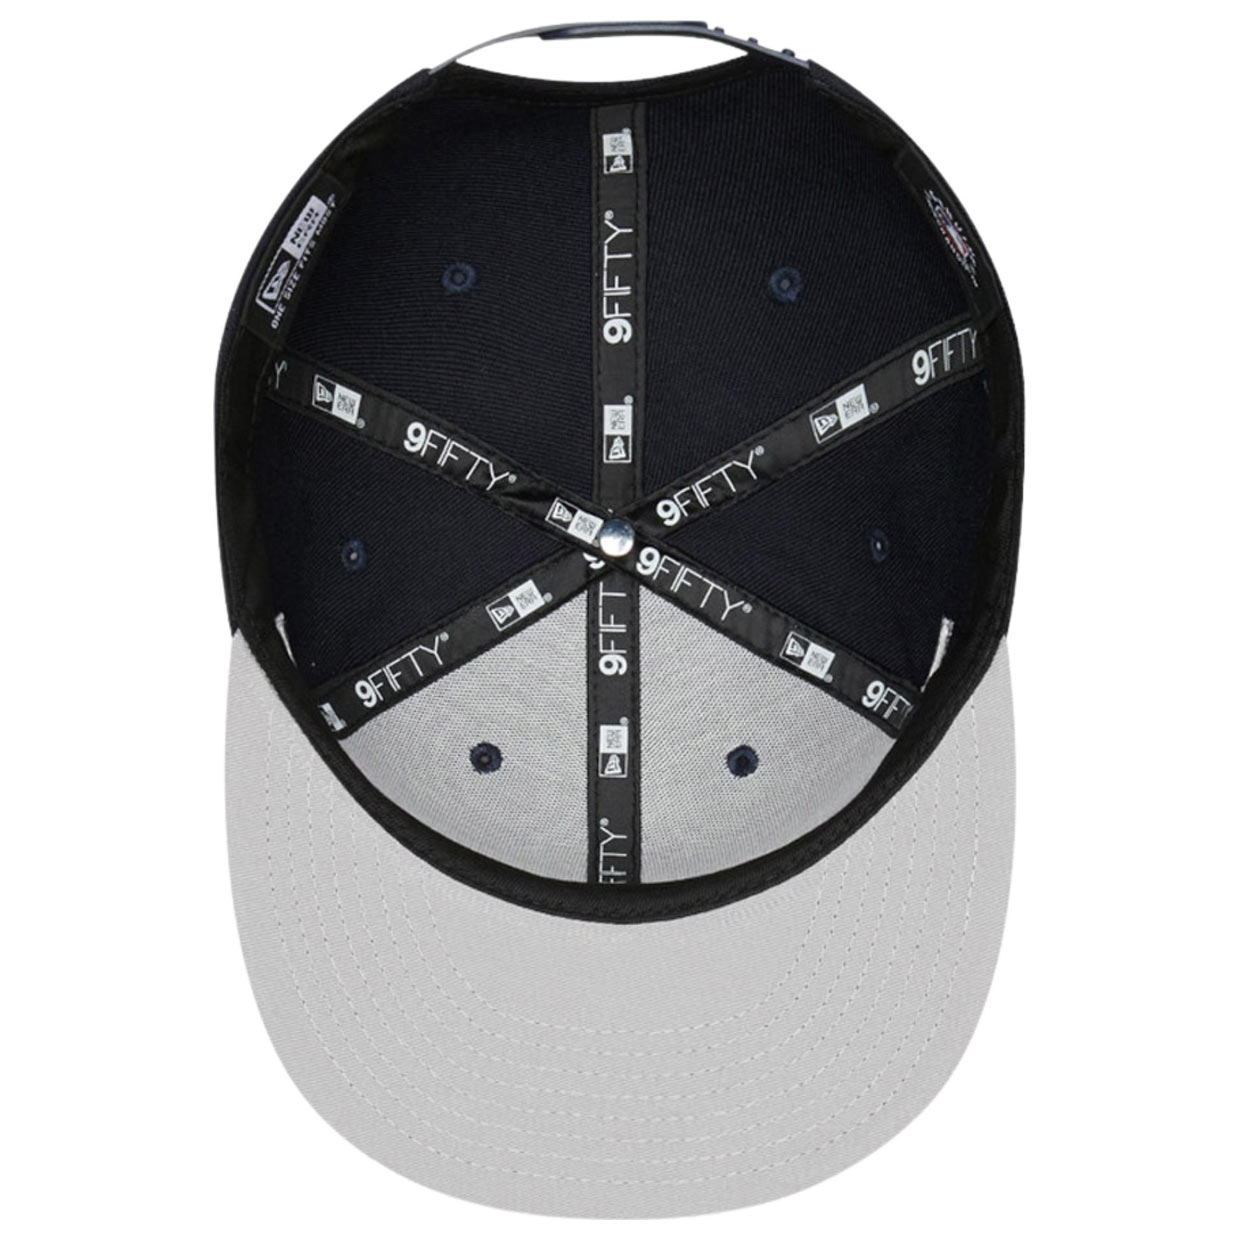 Kappe New York Yankees Typography 9FIFTY Snapback